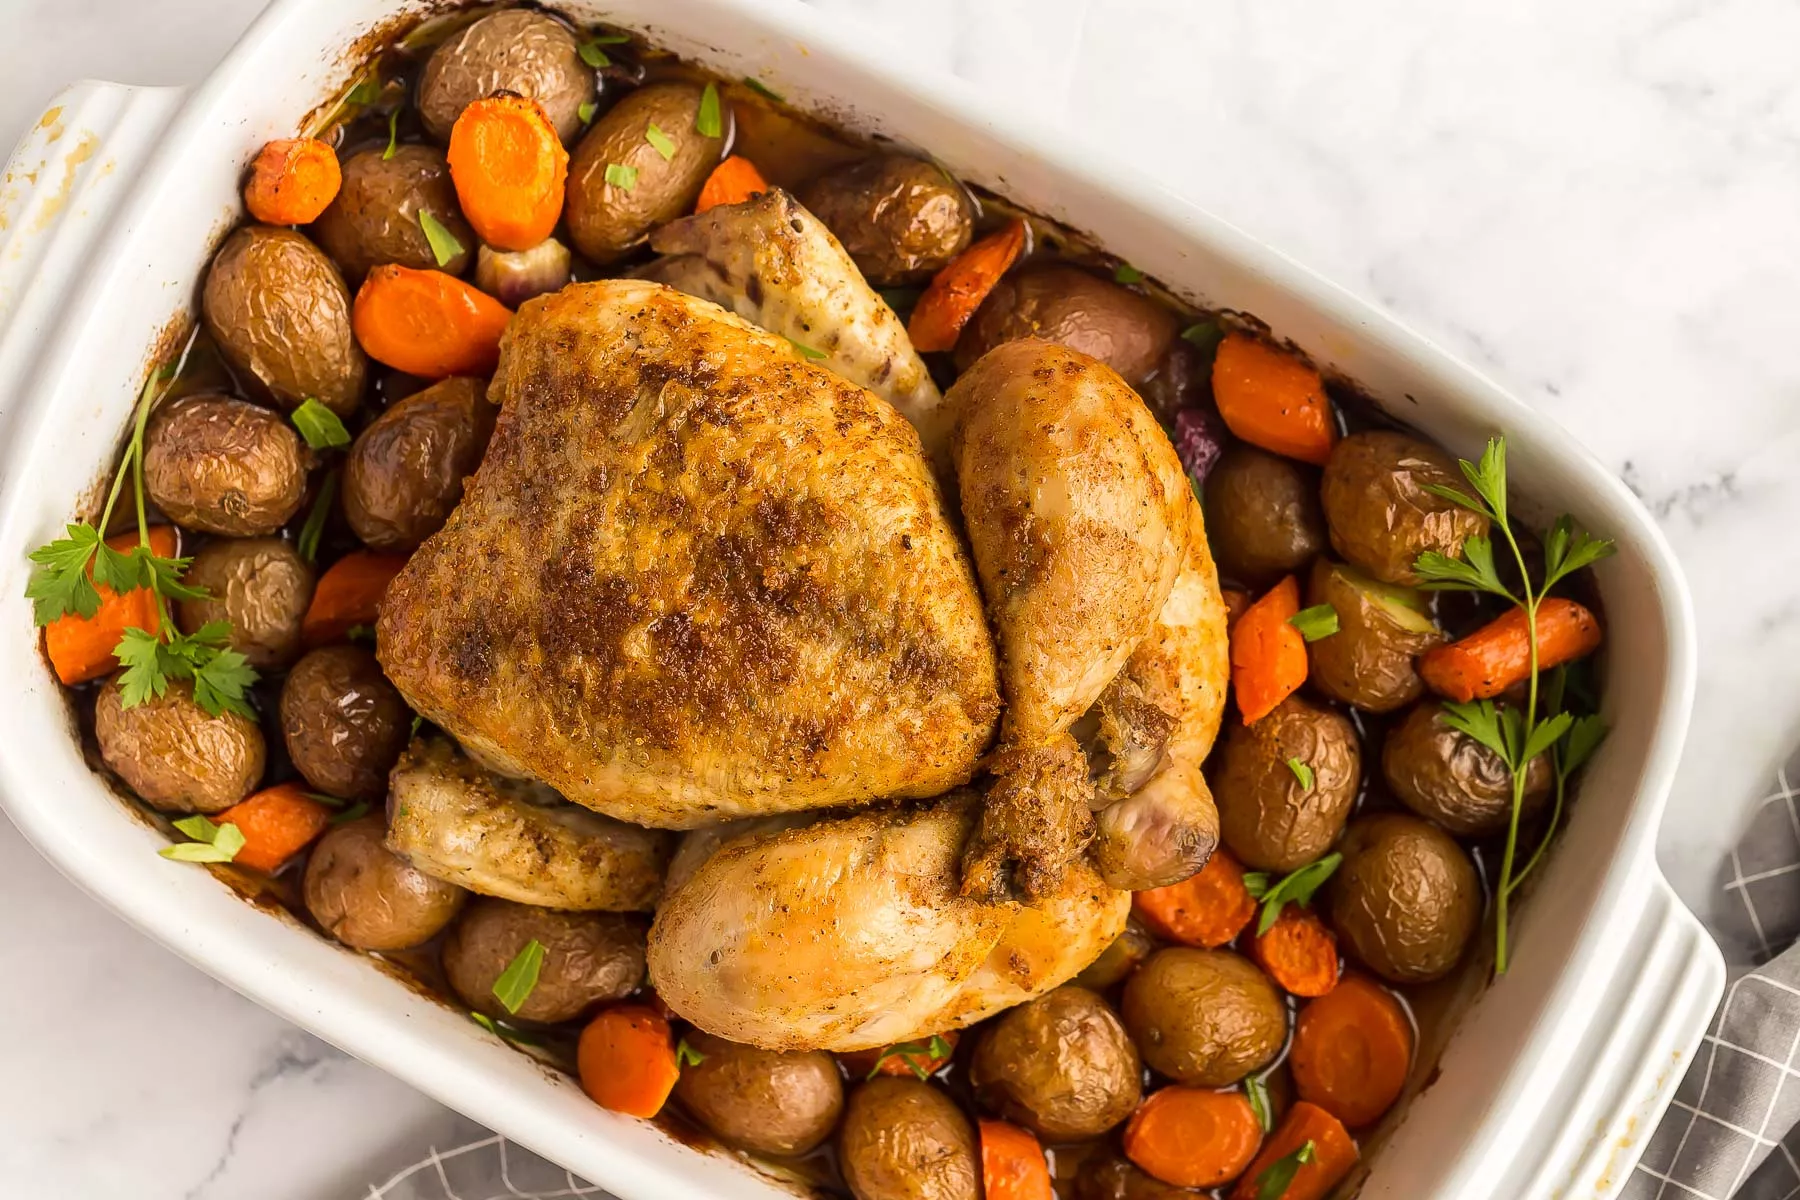 A nice tray of Roast Chicken and Vegetables.